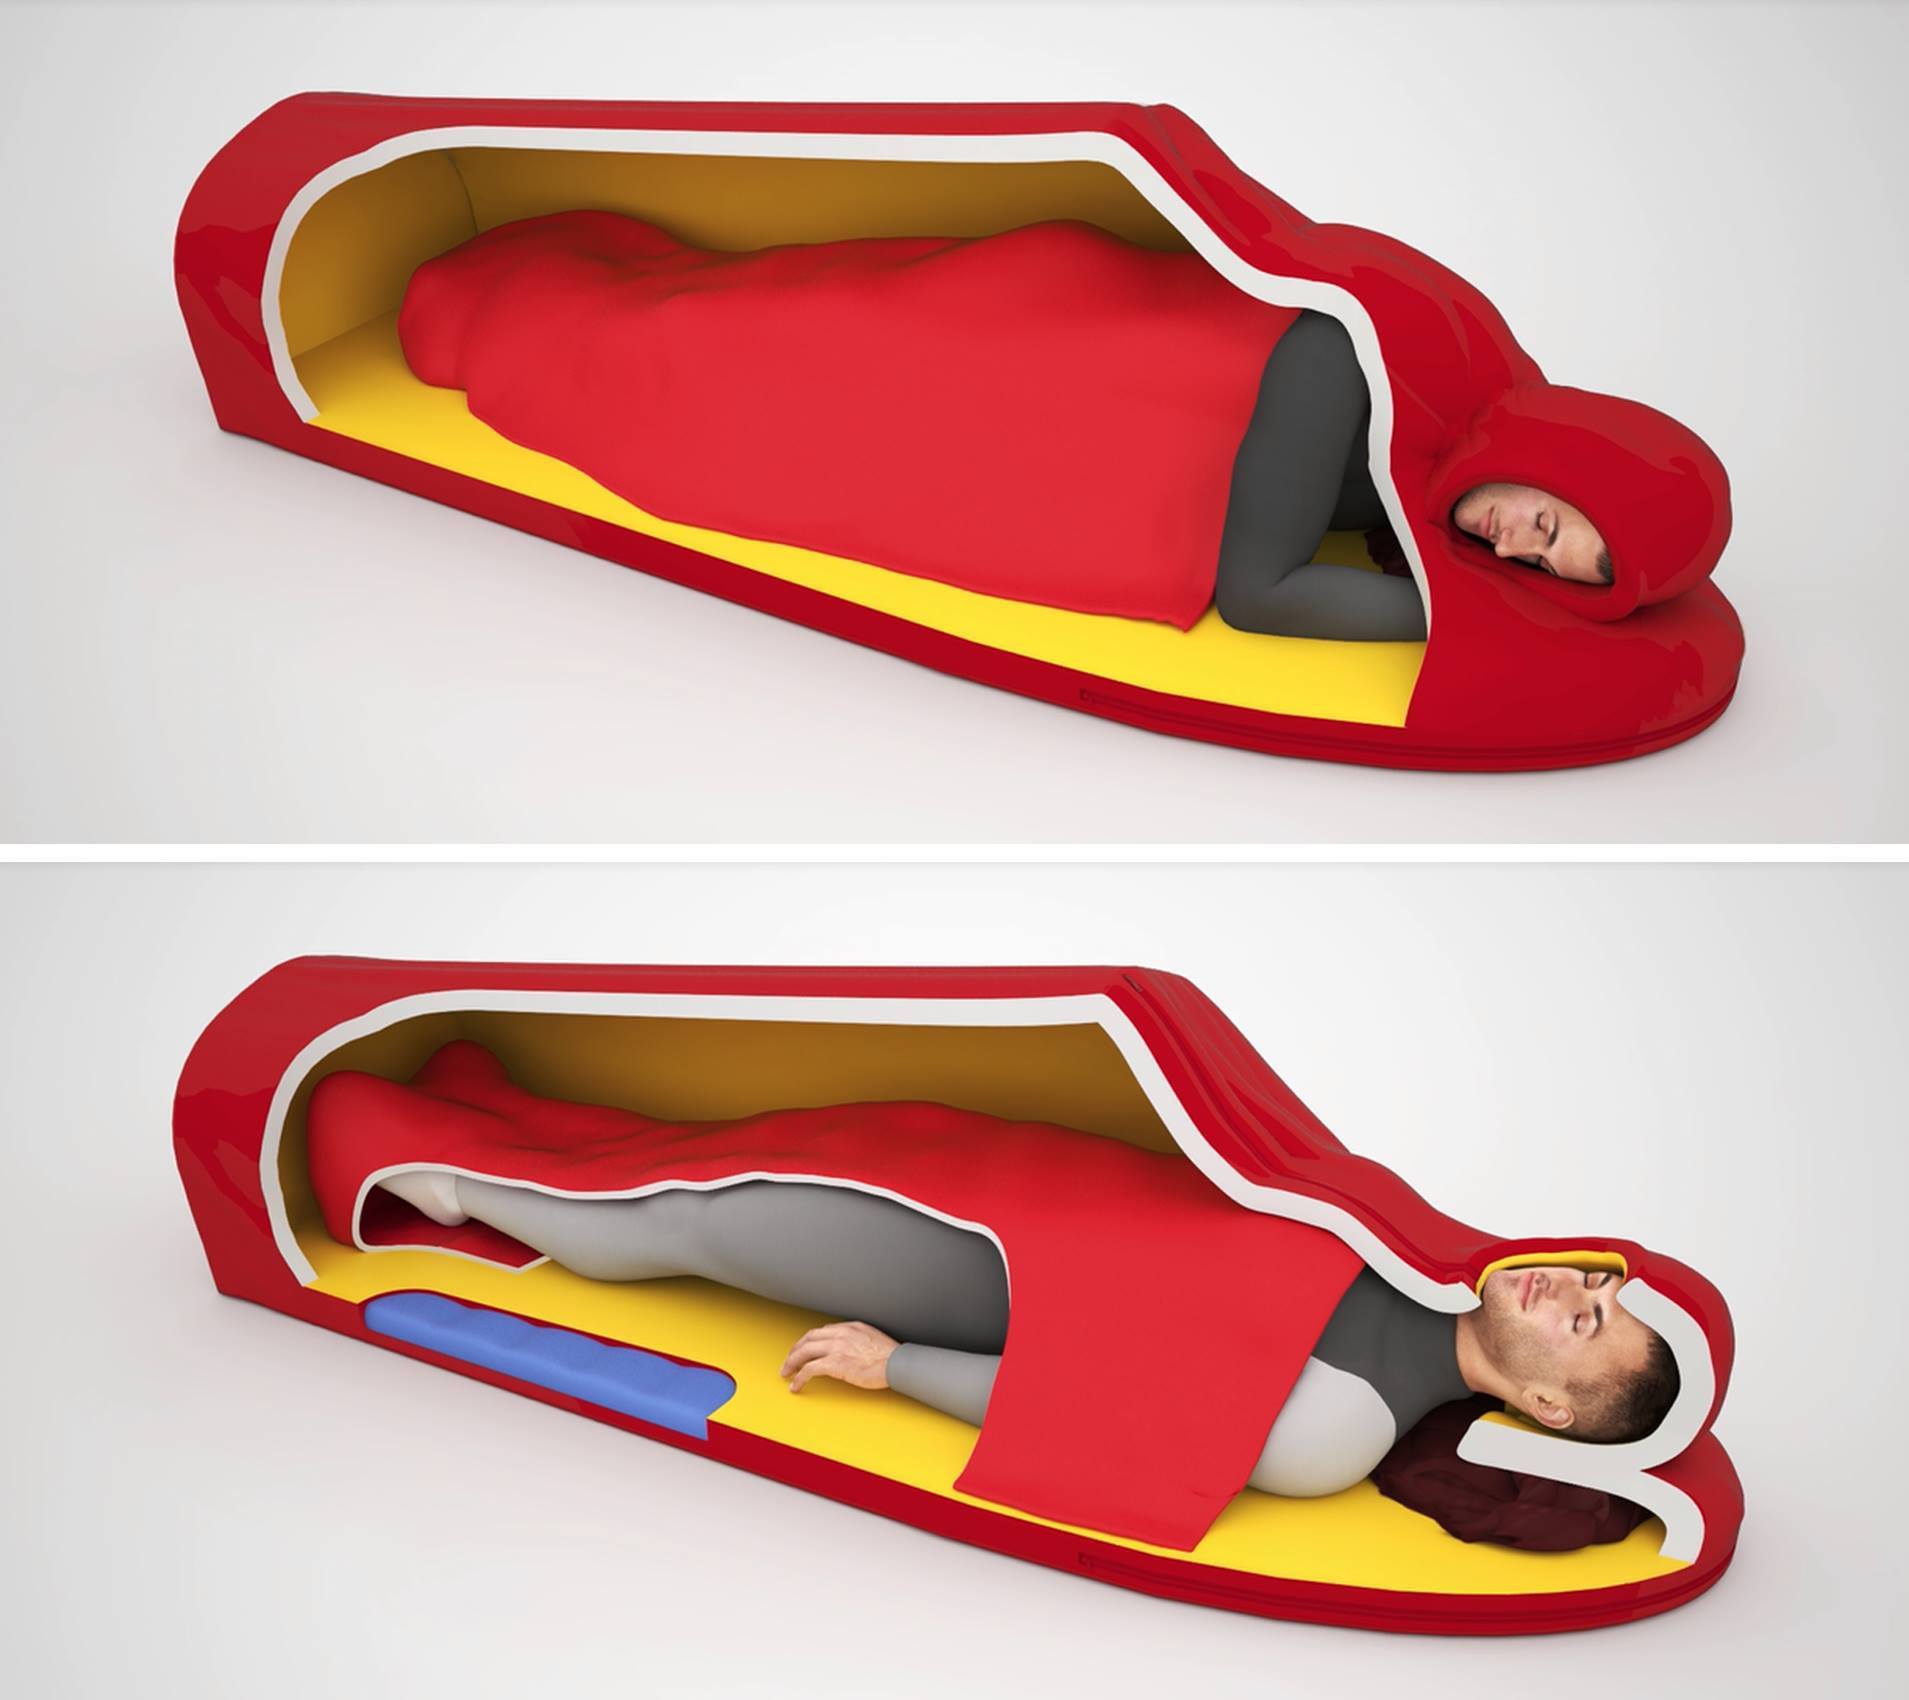 Creative sleeping system for outdoors.